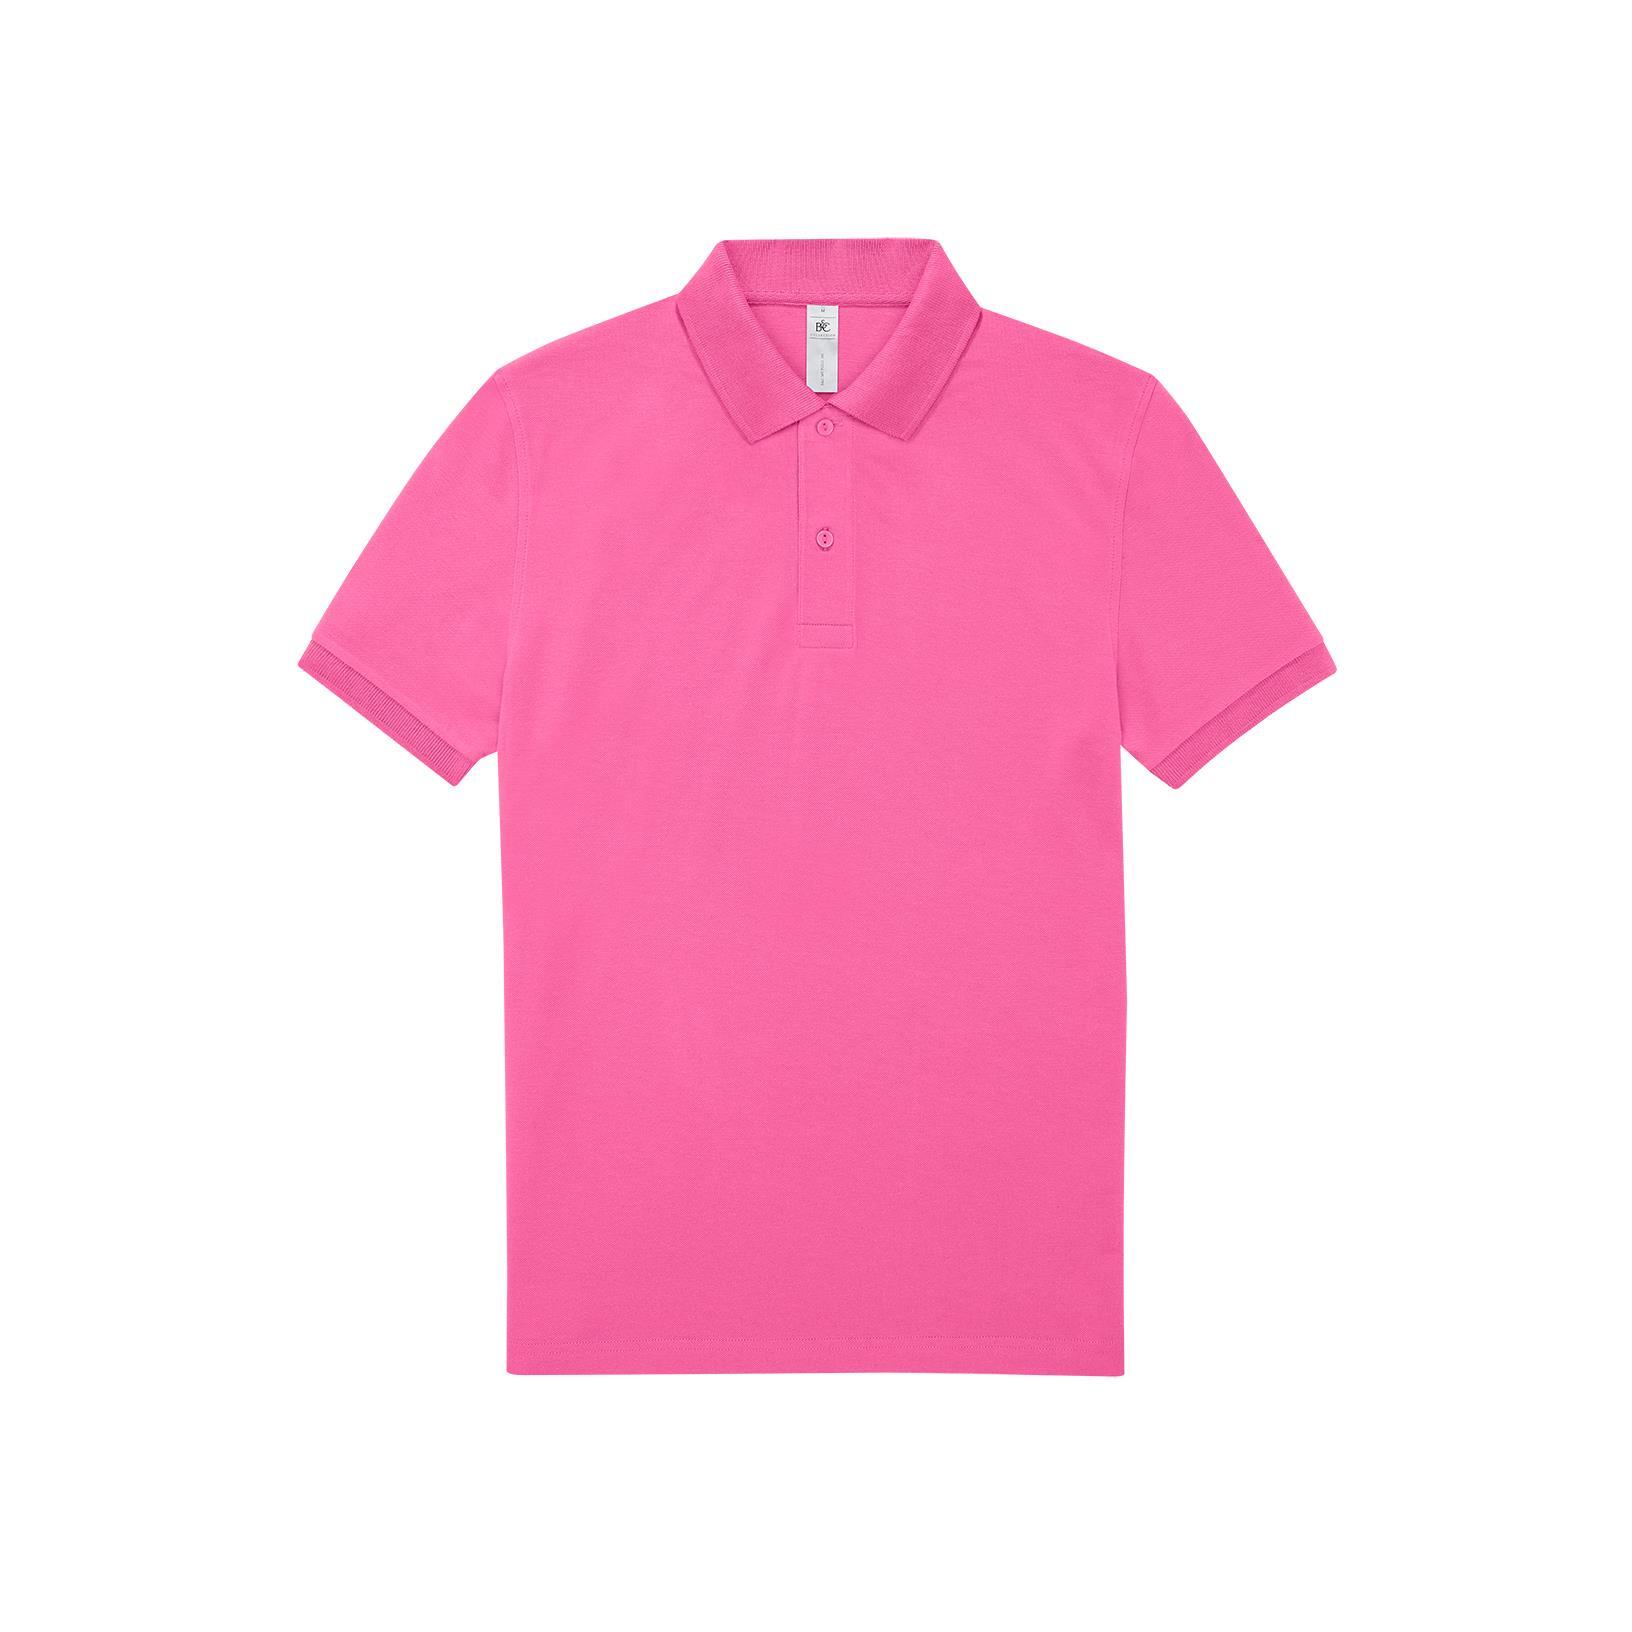 Polo voor mannen lotus roze moderne polo